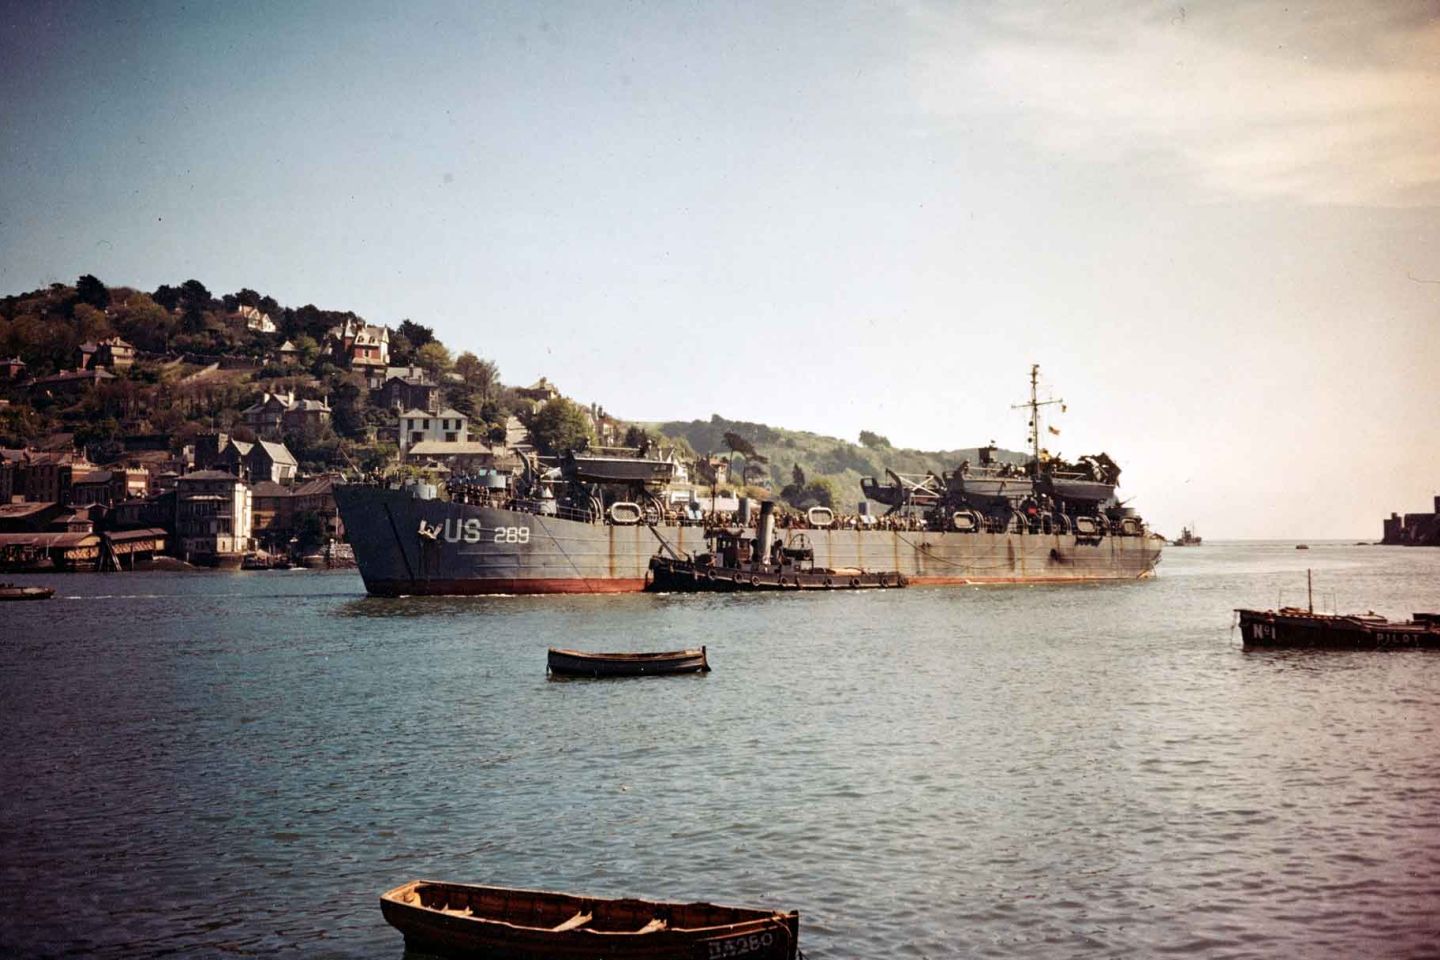 USS LST289 arrives in Dartmouth Harbor, England, after being torpedoed by German MTBs